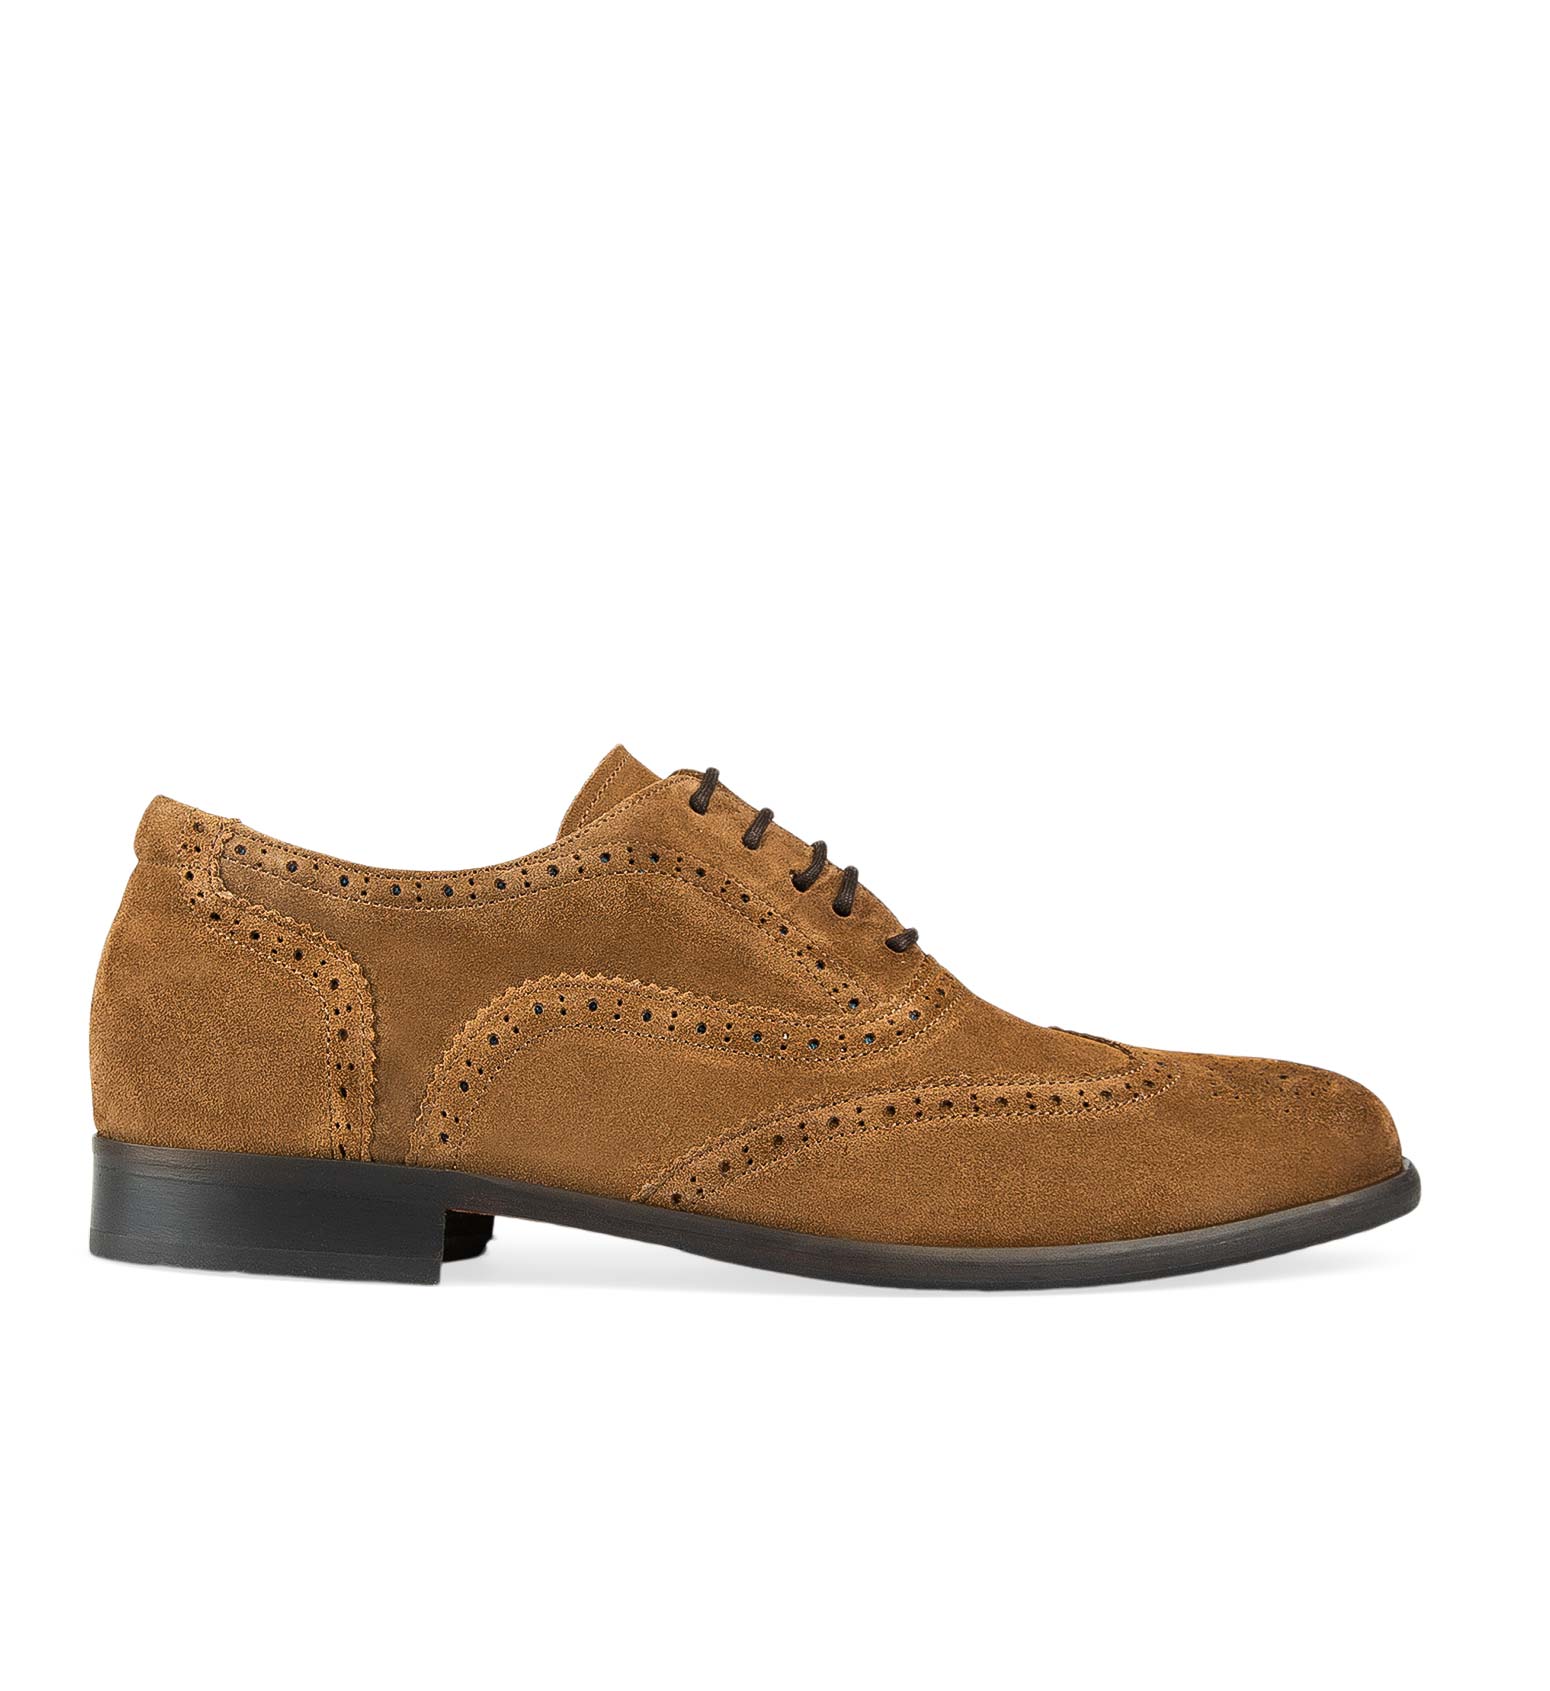 Barium Tobacco Suede Lace Up Dress Shoes | Bared Footwear